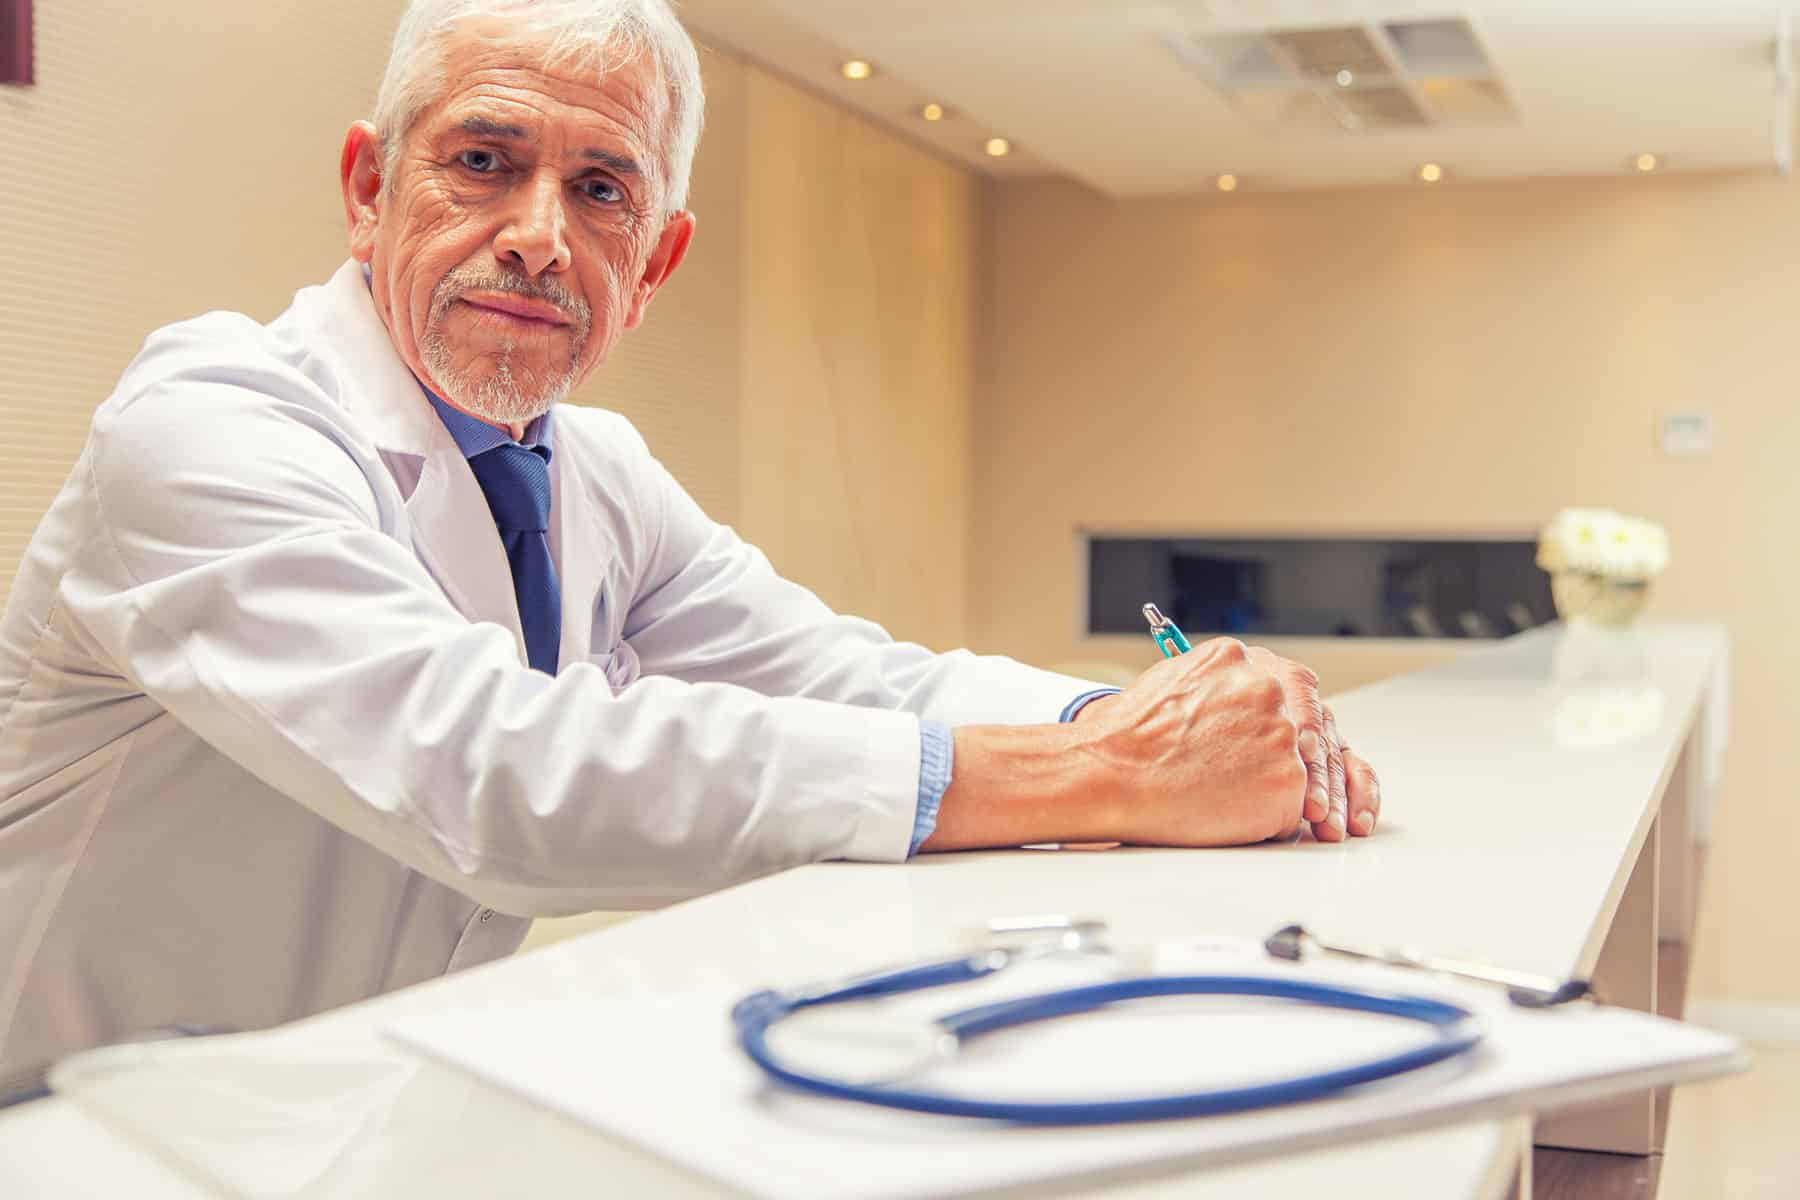 Doctor looking at camera with stethoscope on the table in front of him